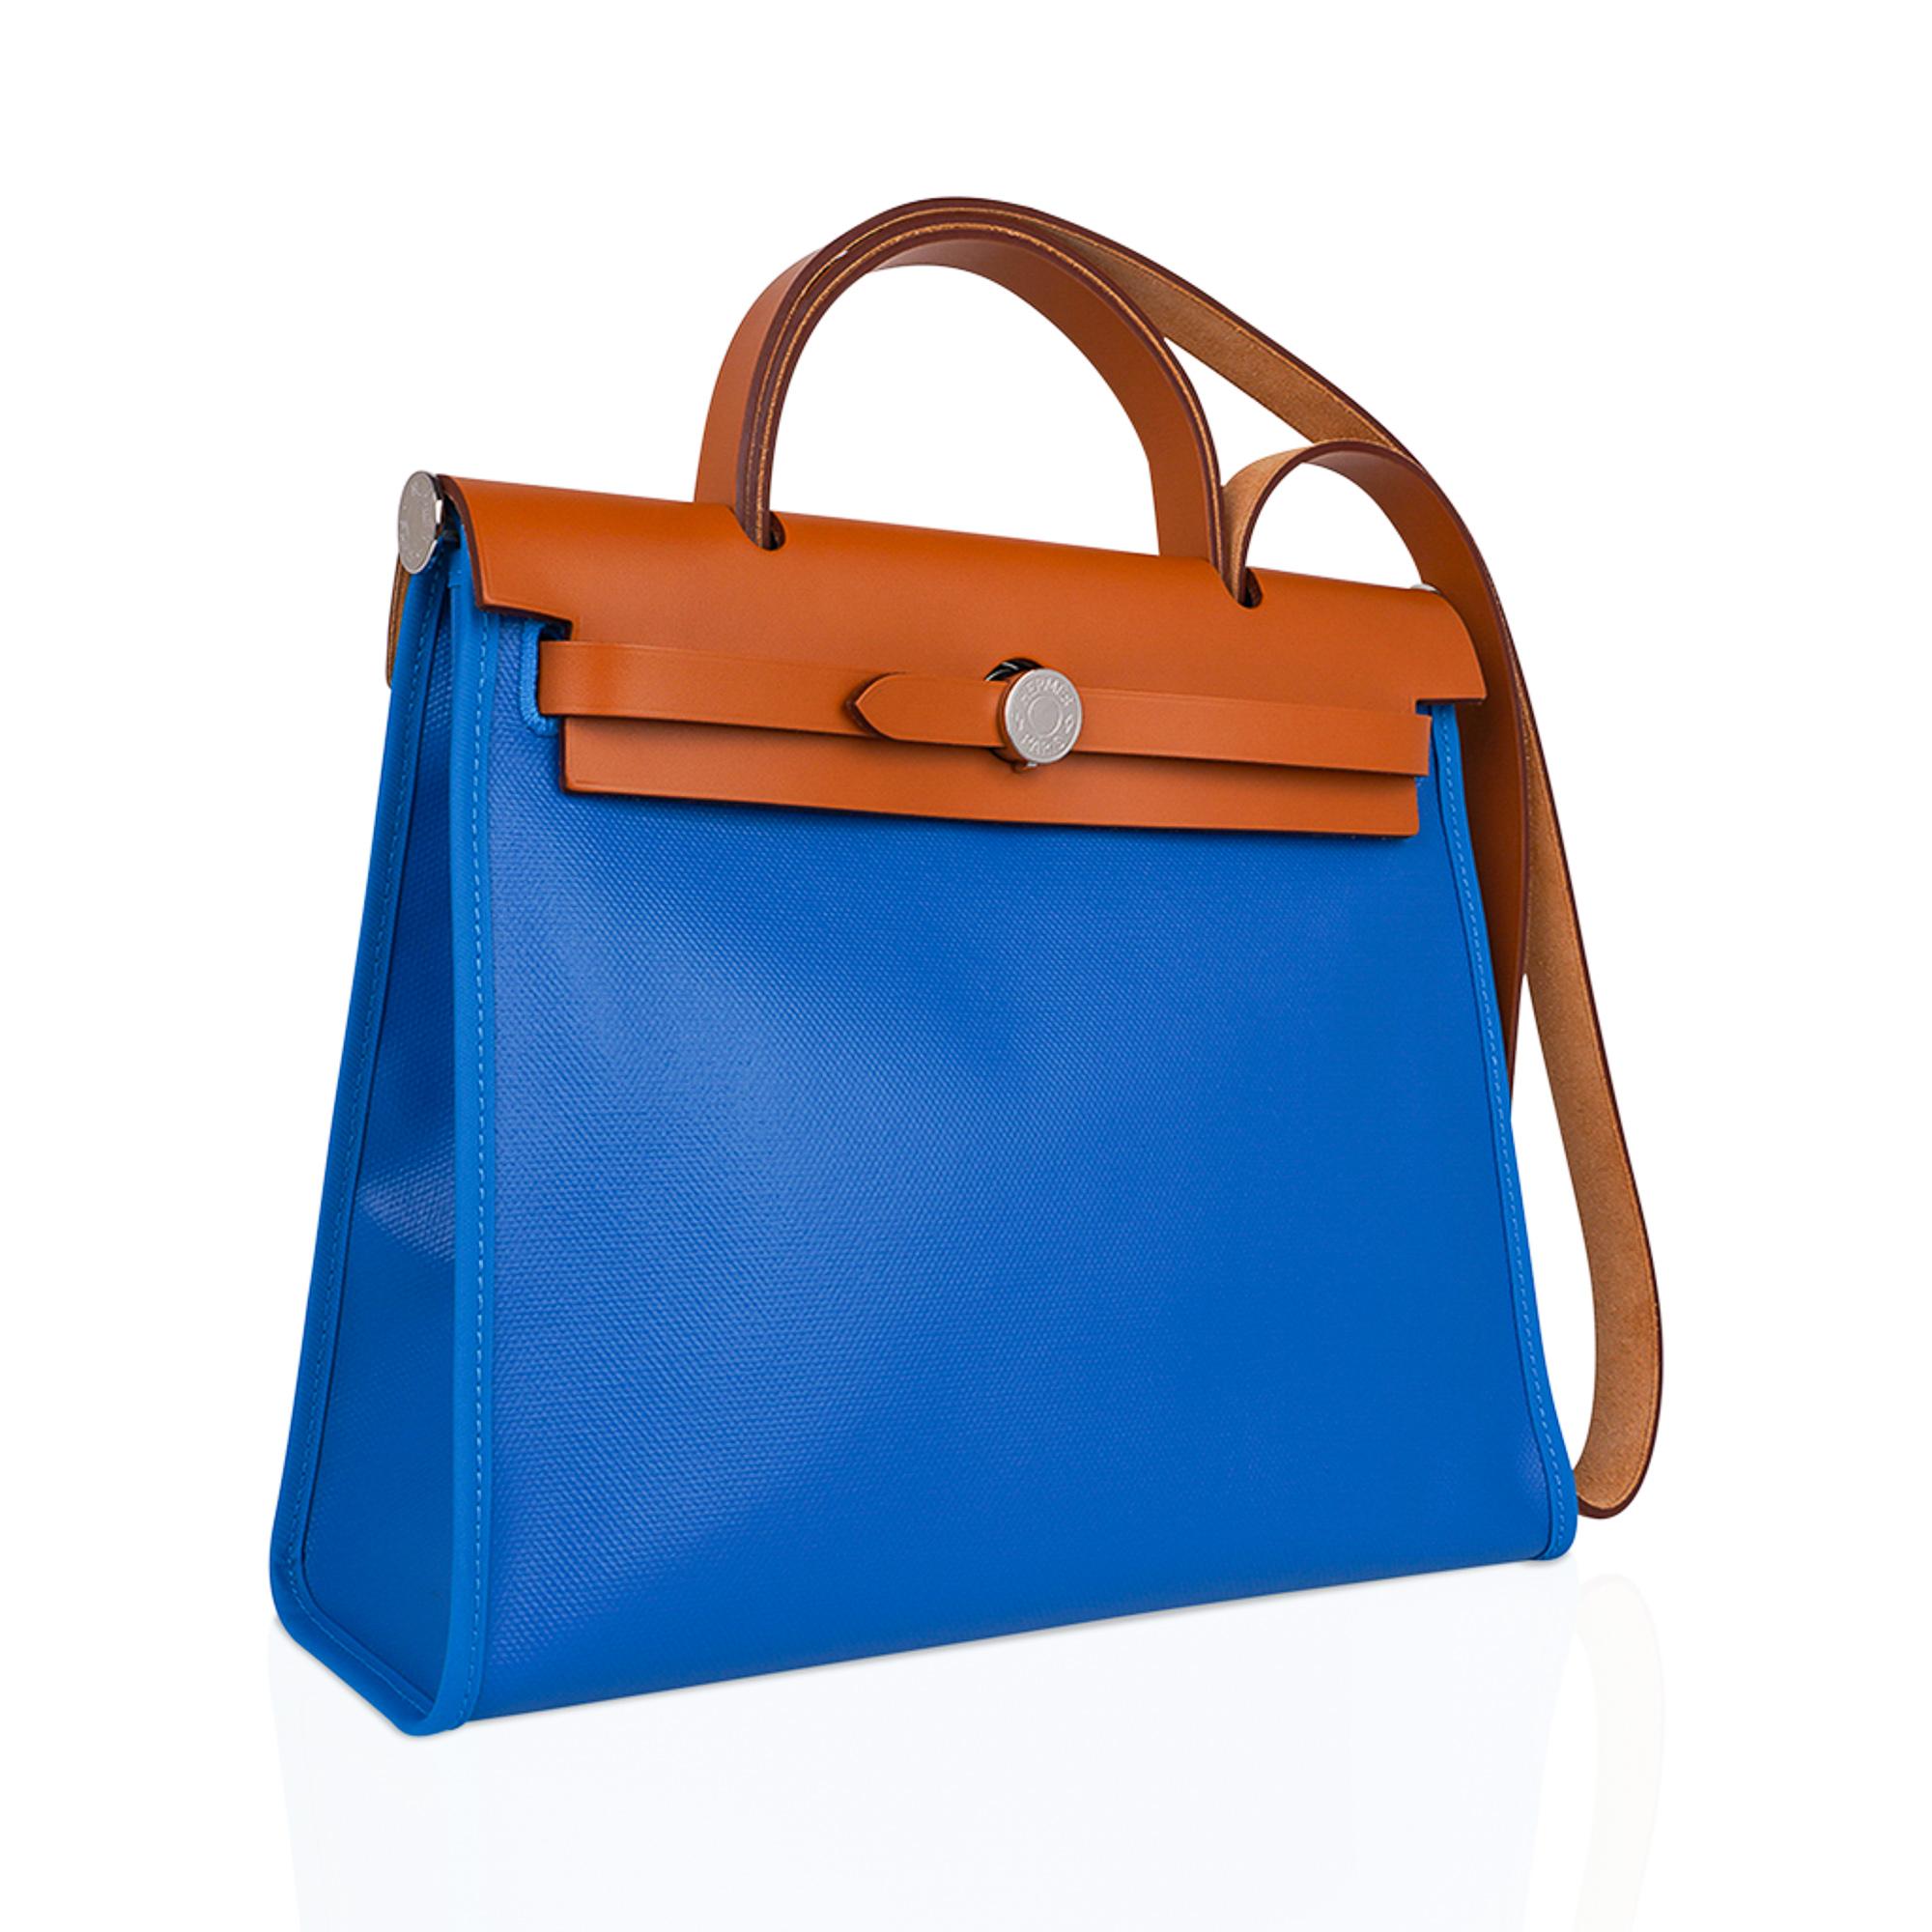 Mightychic offers an Hermes Herbag Zip 31 featured in vivid Bleu Frida Berline, a coated canvas and Vache Naturelle leather.
Berline is a coated canvas which is also water resistant.
Signature Herbag Clou de Selle in Palladium hardware.
Has a